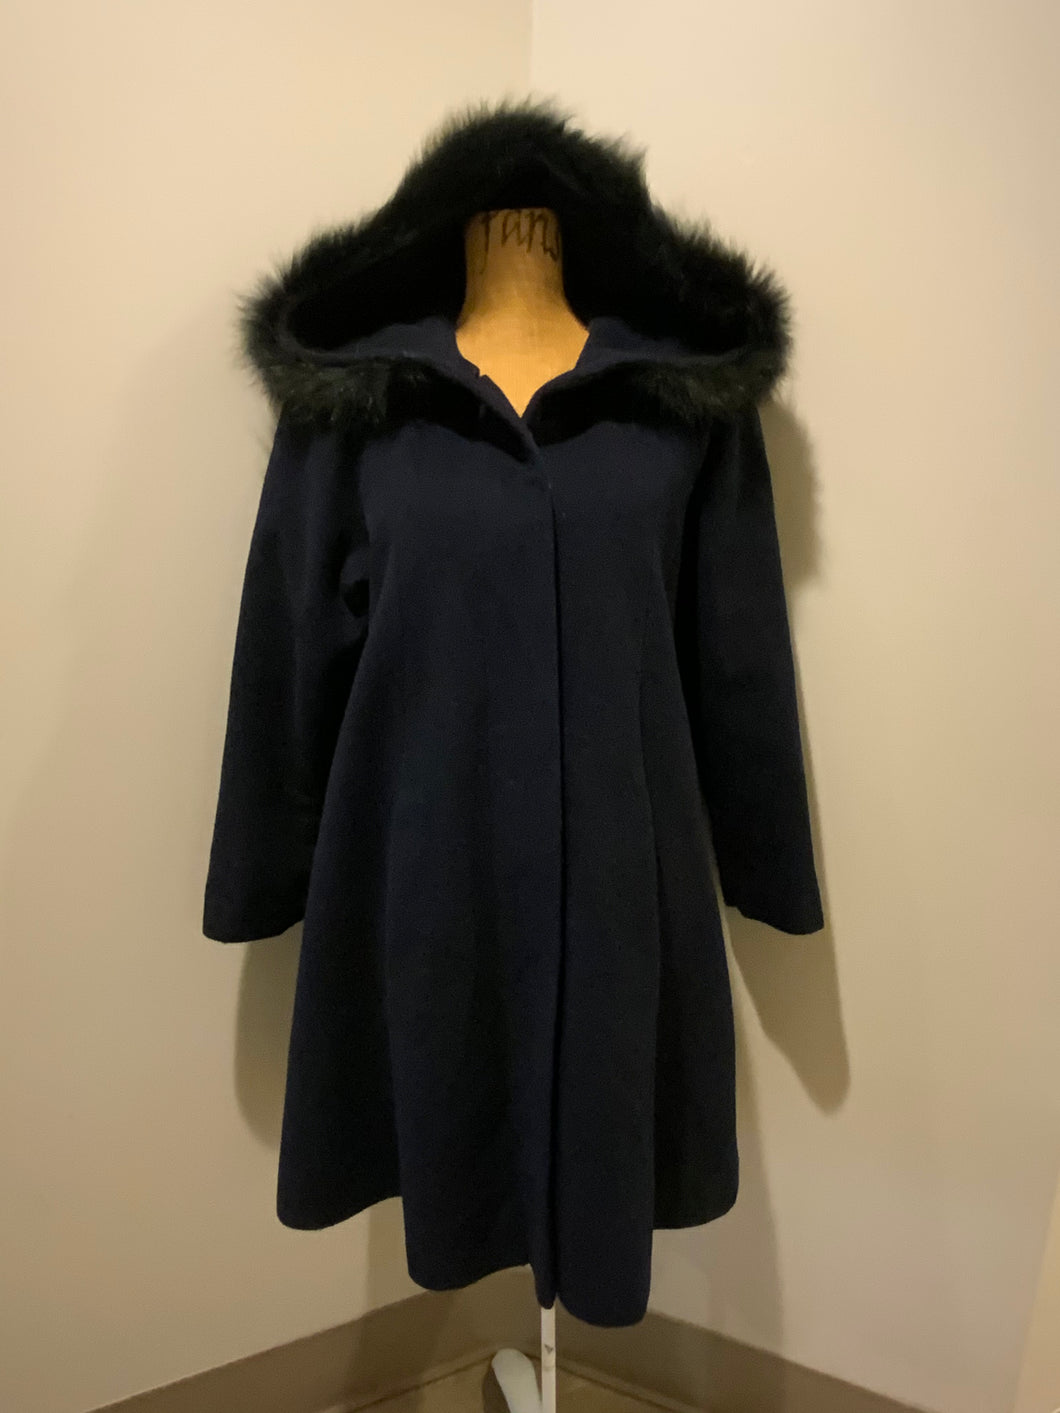 Kingspier Vintage - Braemar Petites by Jeremy Scott 1980’s/ 1990’s wool blend coat in navy blue with synthetic fur trim around the hood. Features hidden button closures down the front and slash pockets. Made in Romania